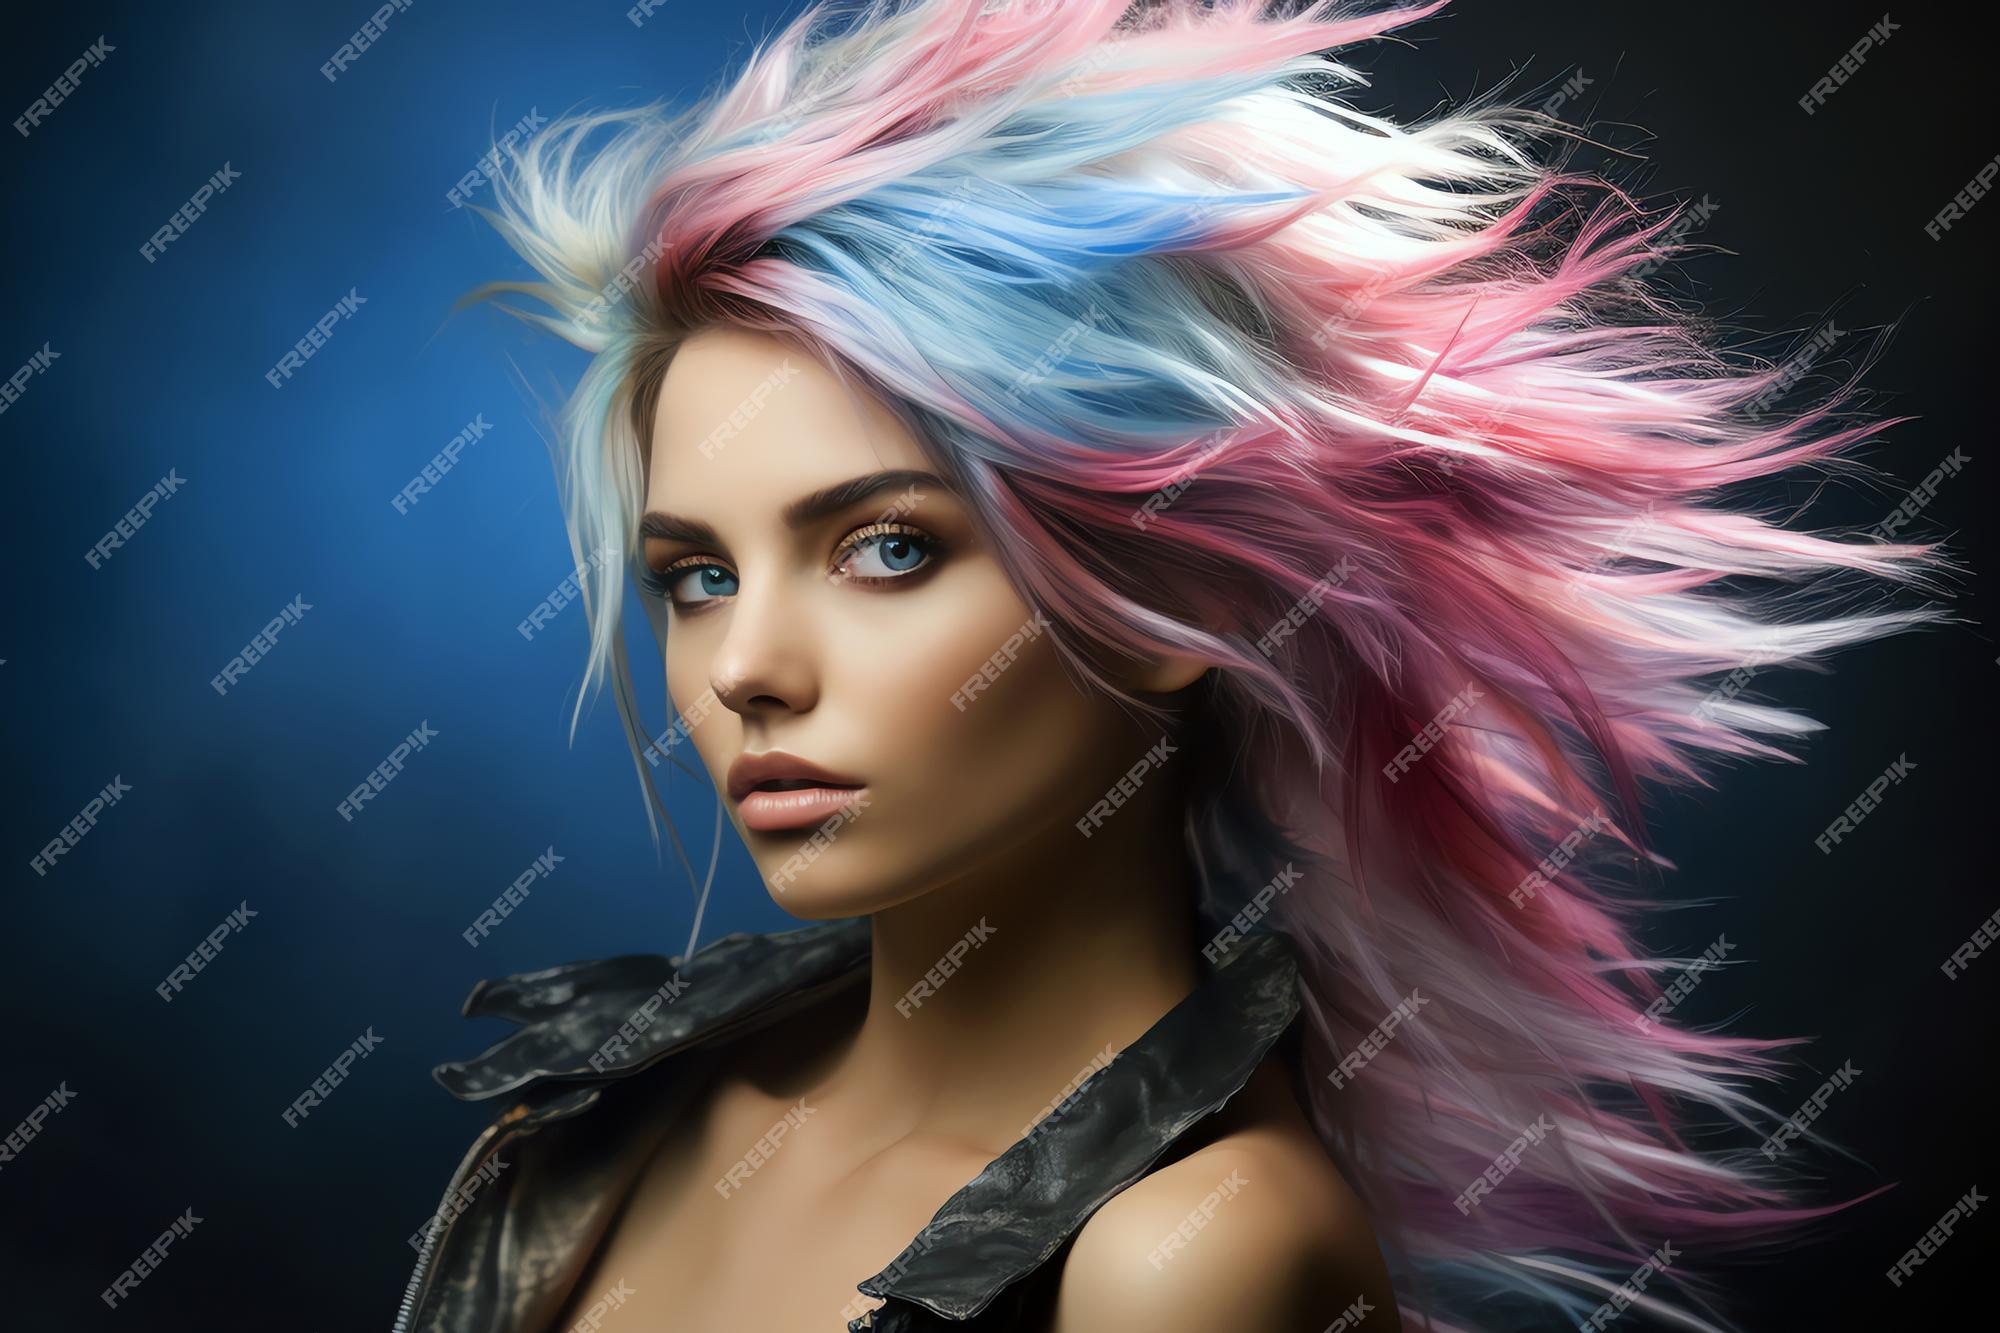 5. "Step-by-Step Tutorial for Creating a Pink and Blue Hair Mixed Style" - wide 1